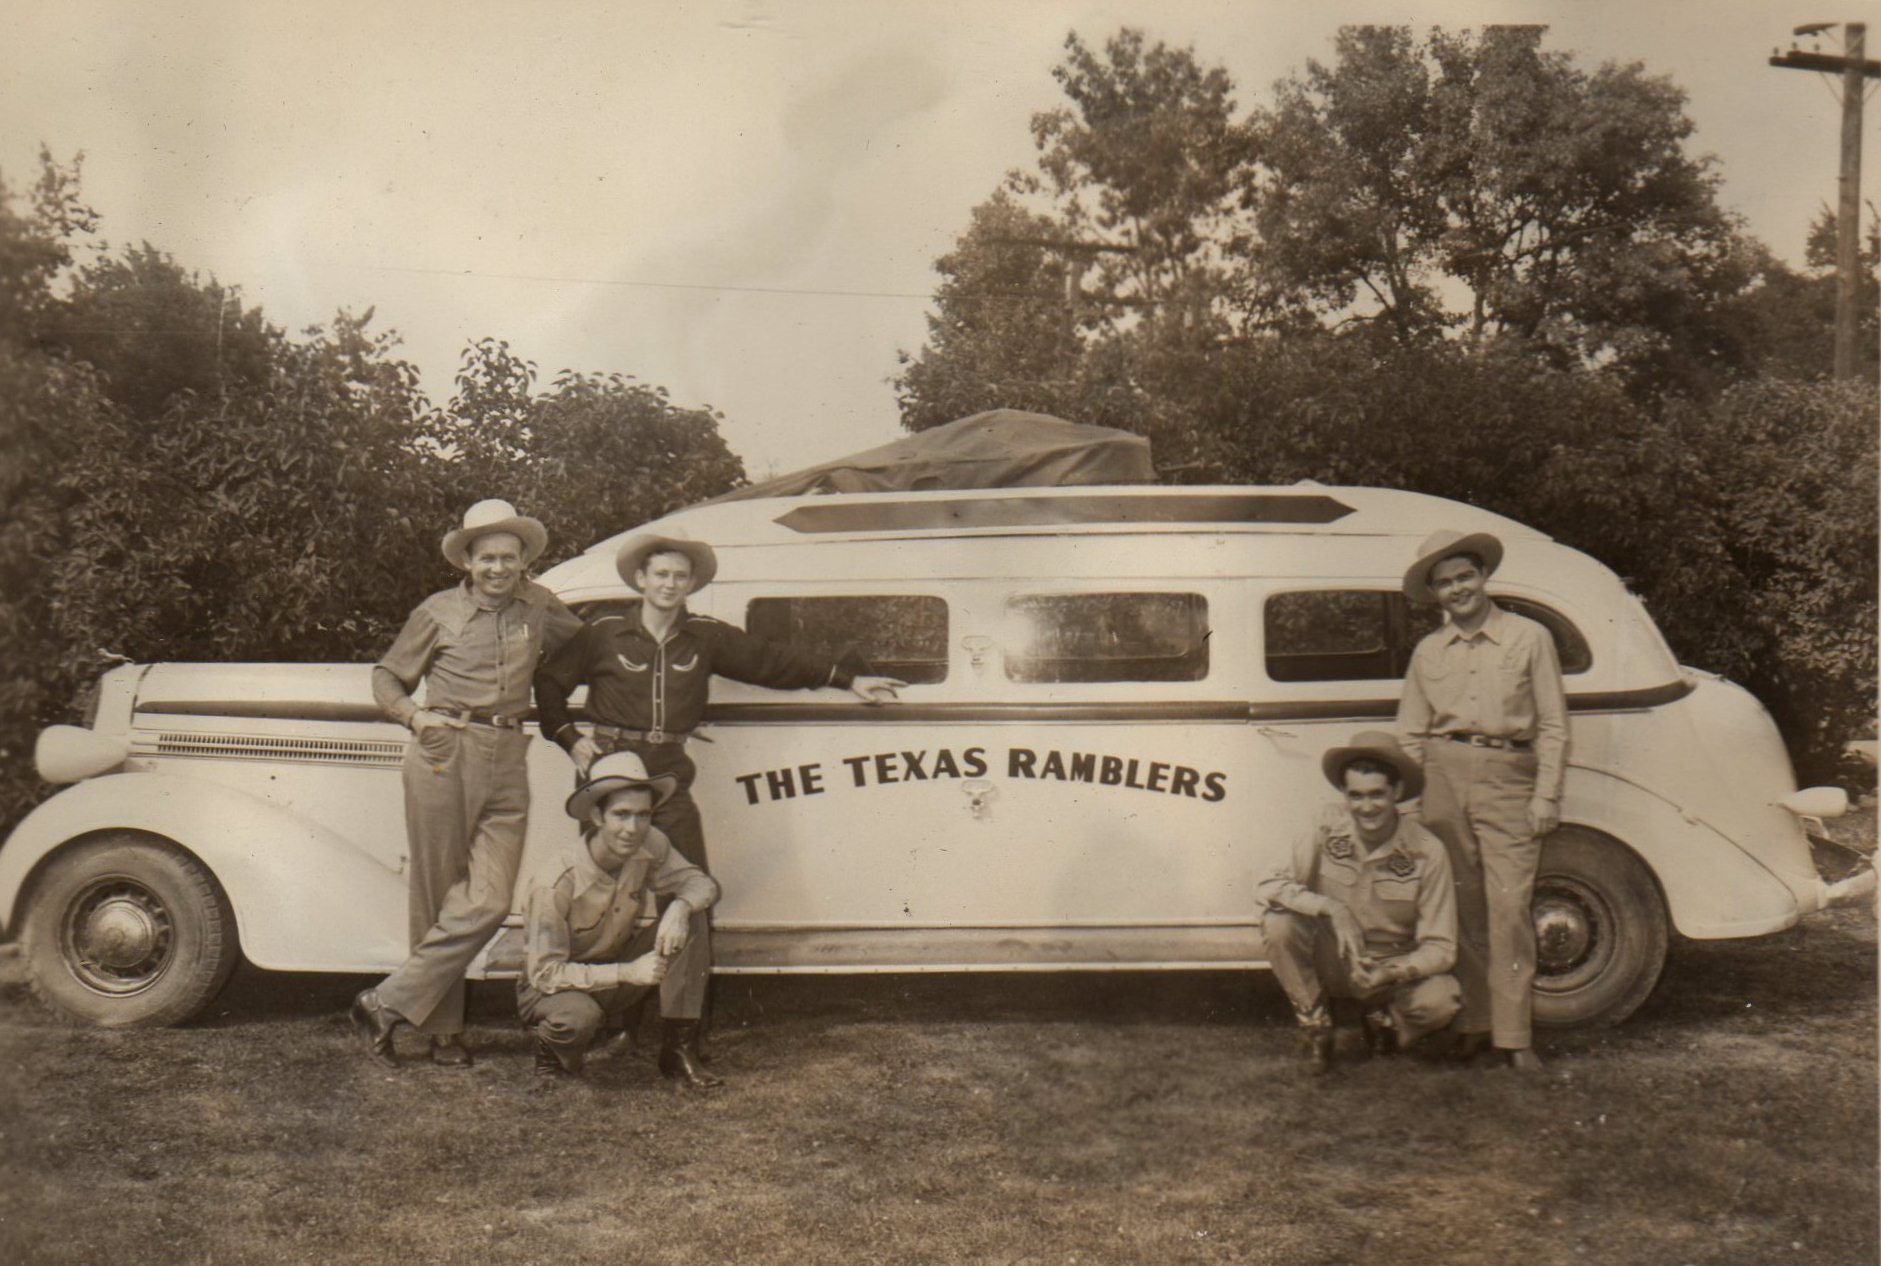 The Texas Ramblers with their car